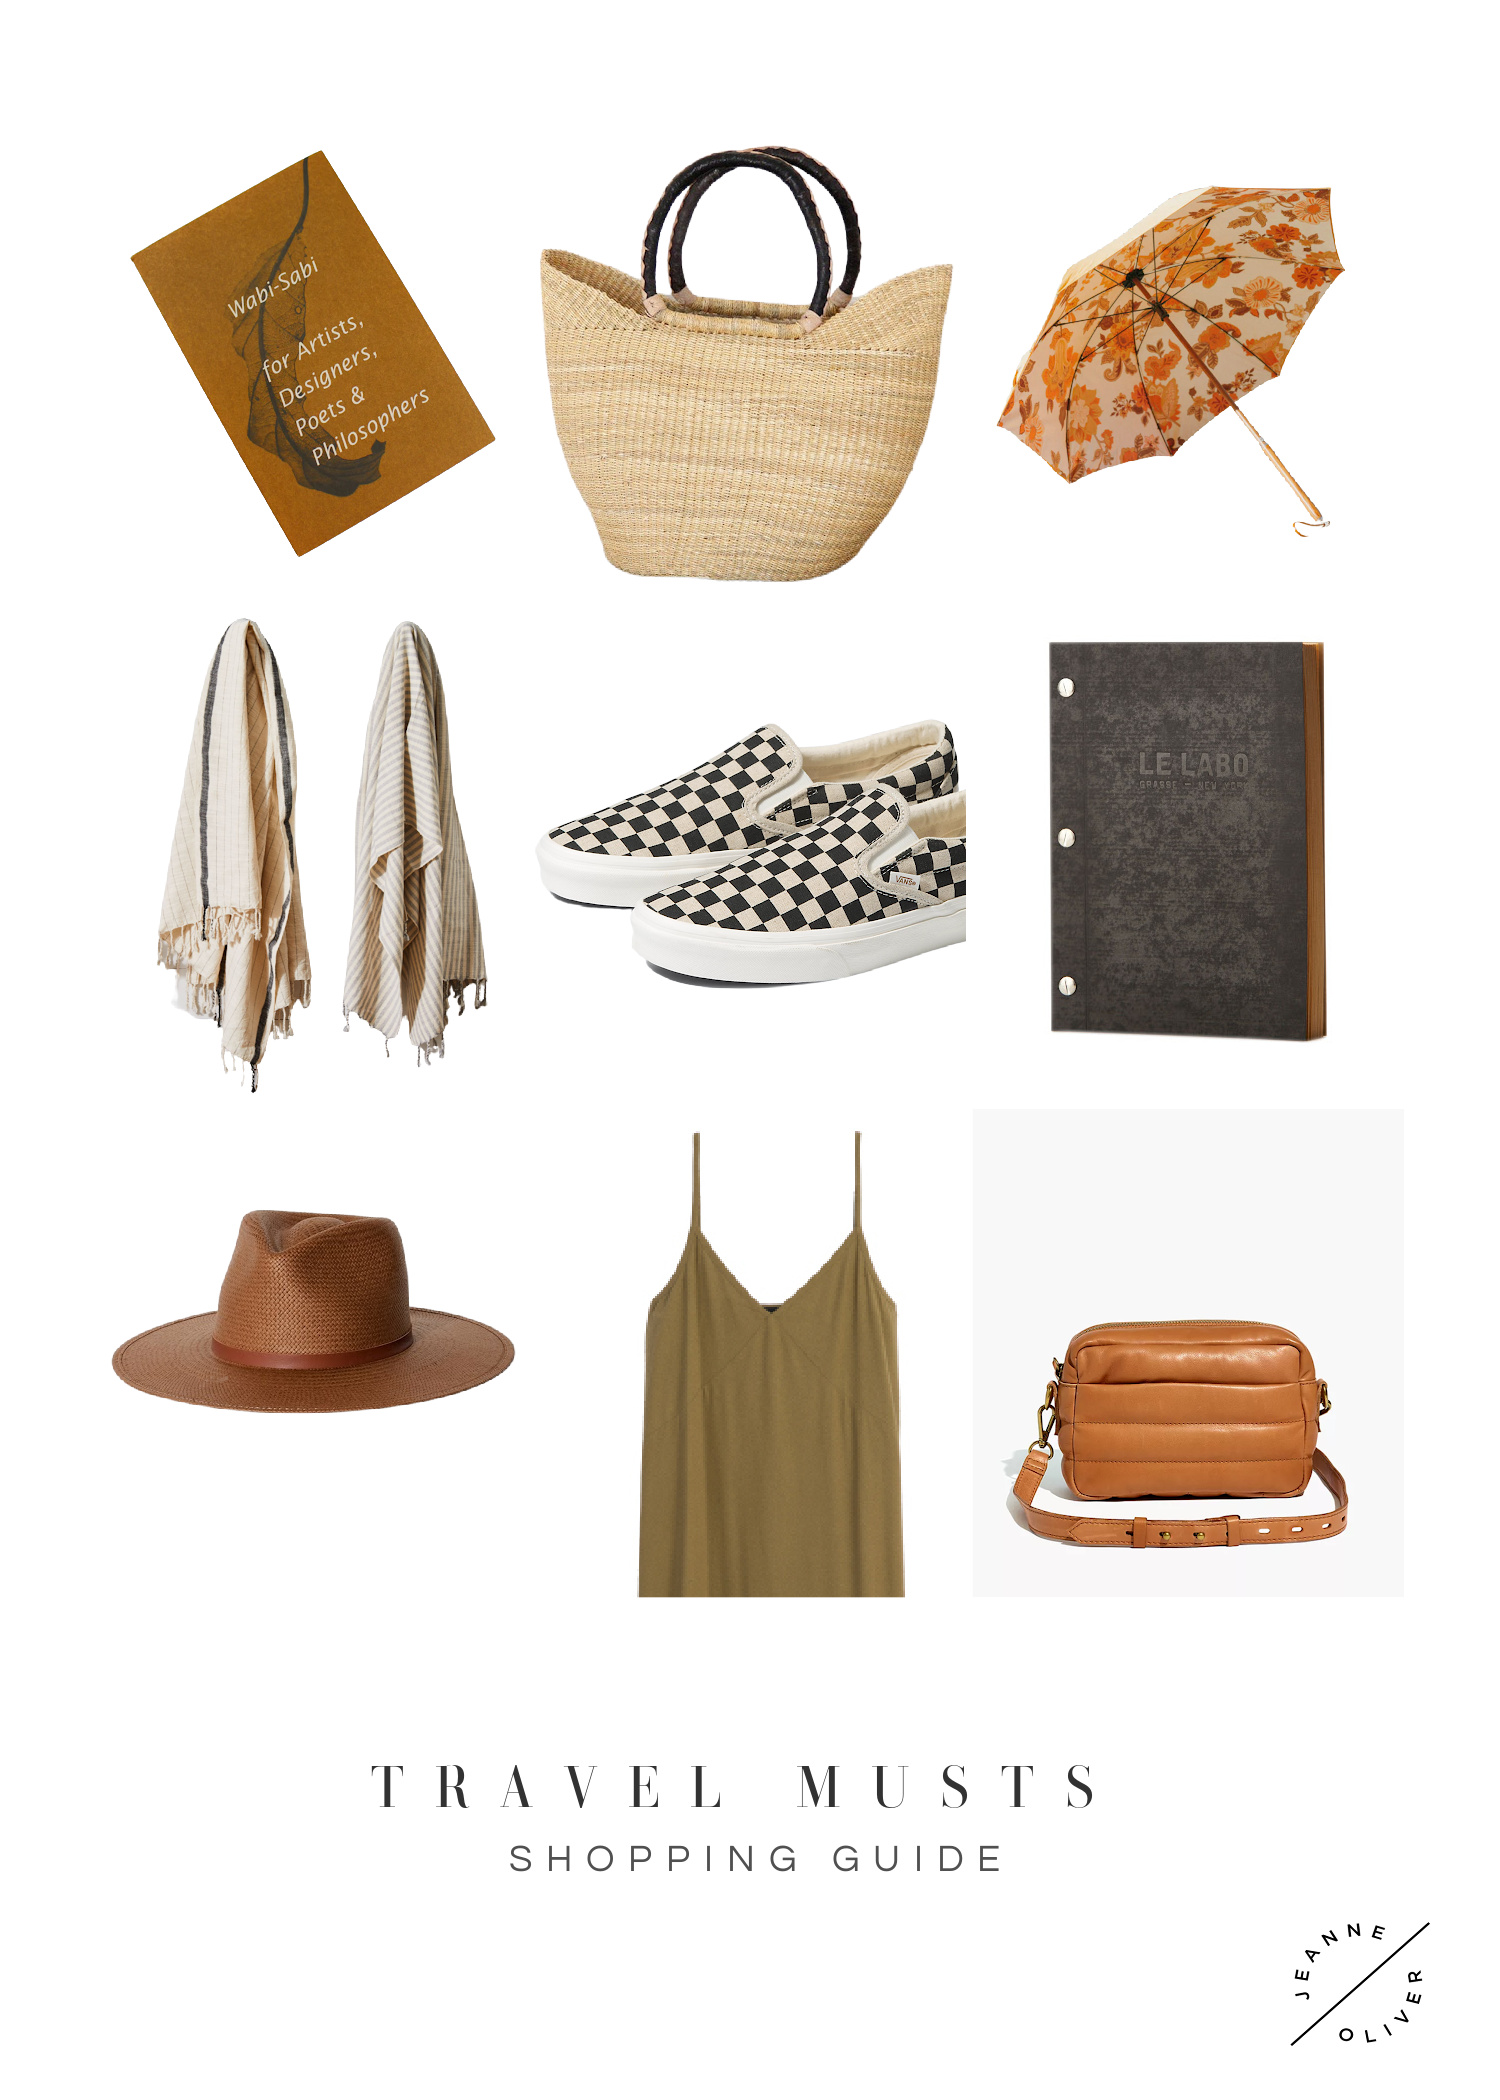 Travel Musts Shopping Guide